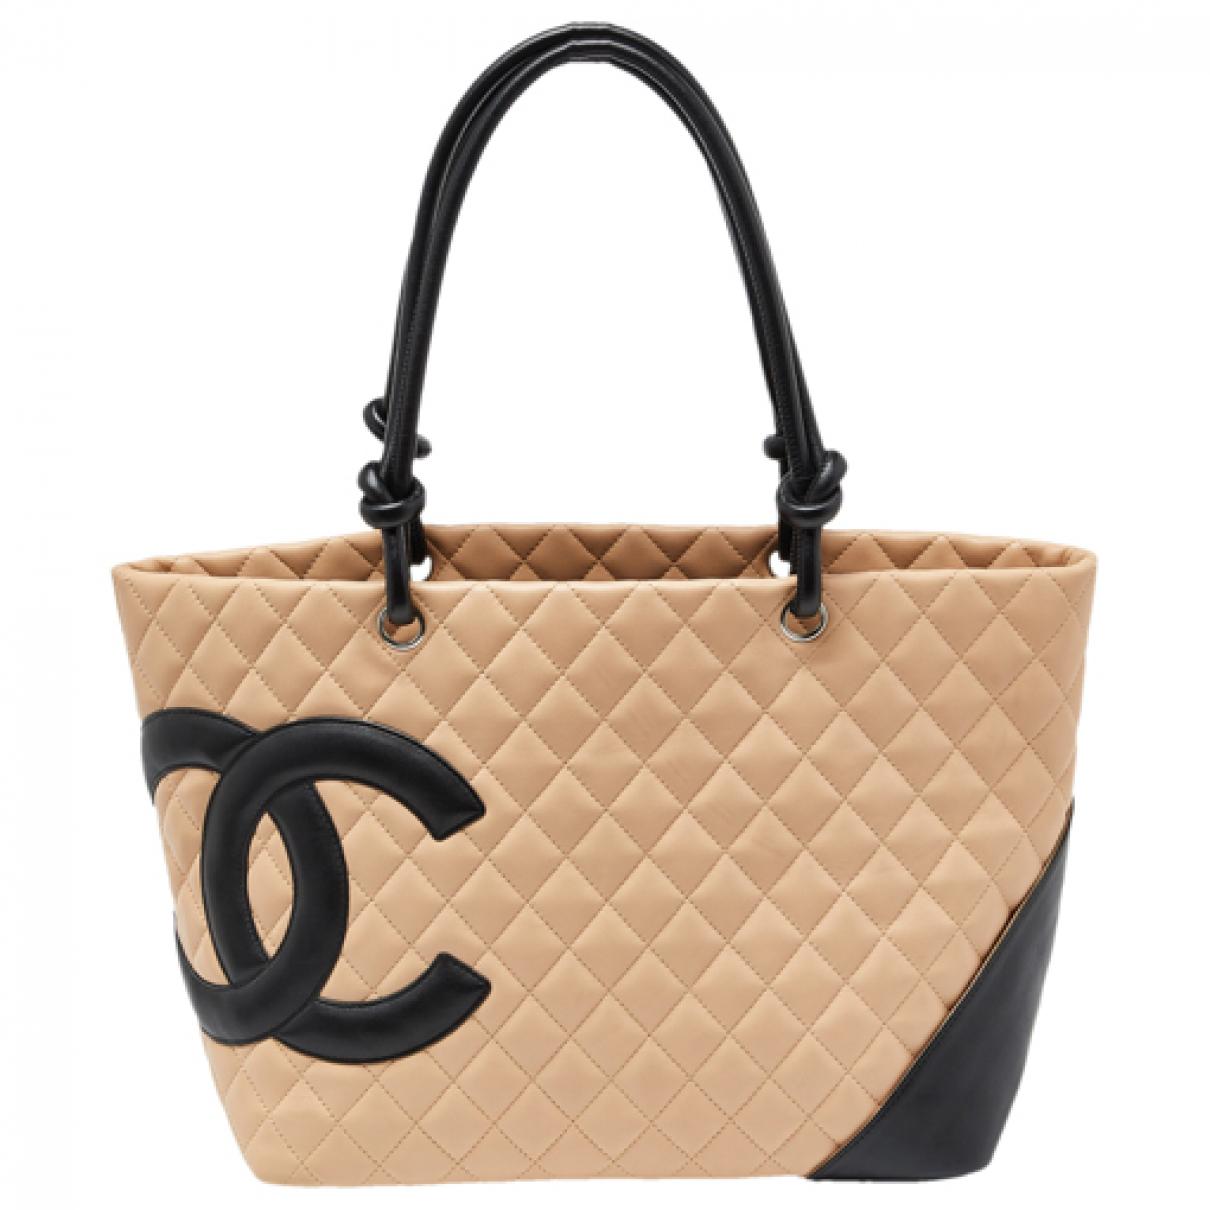 Cambon leather handbag Chanel Black in Leather - 27477945